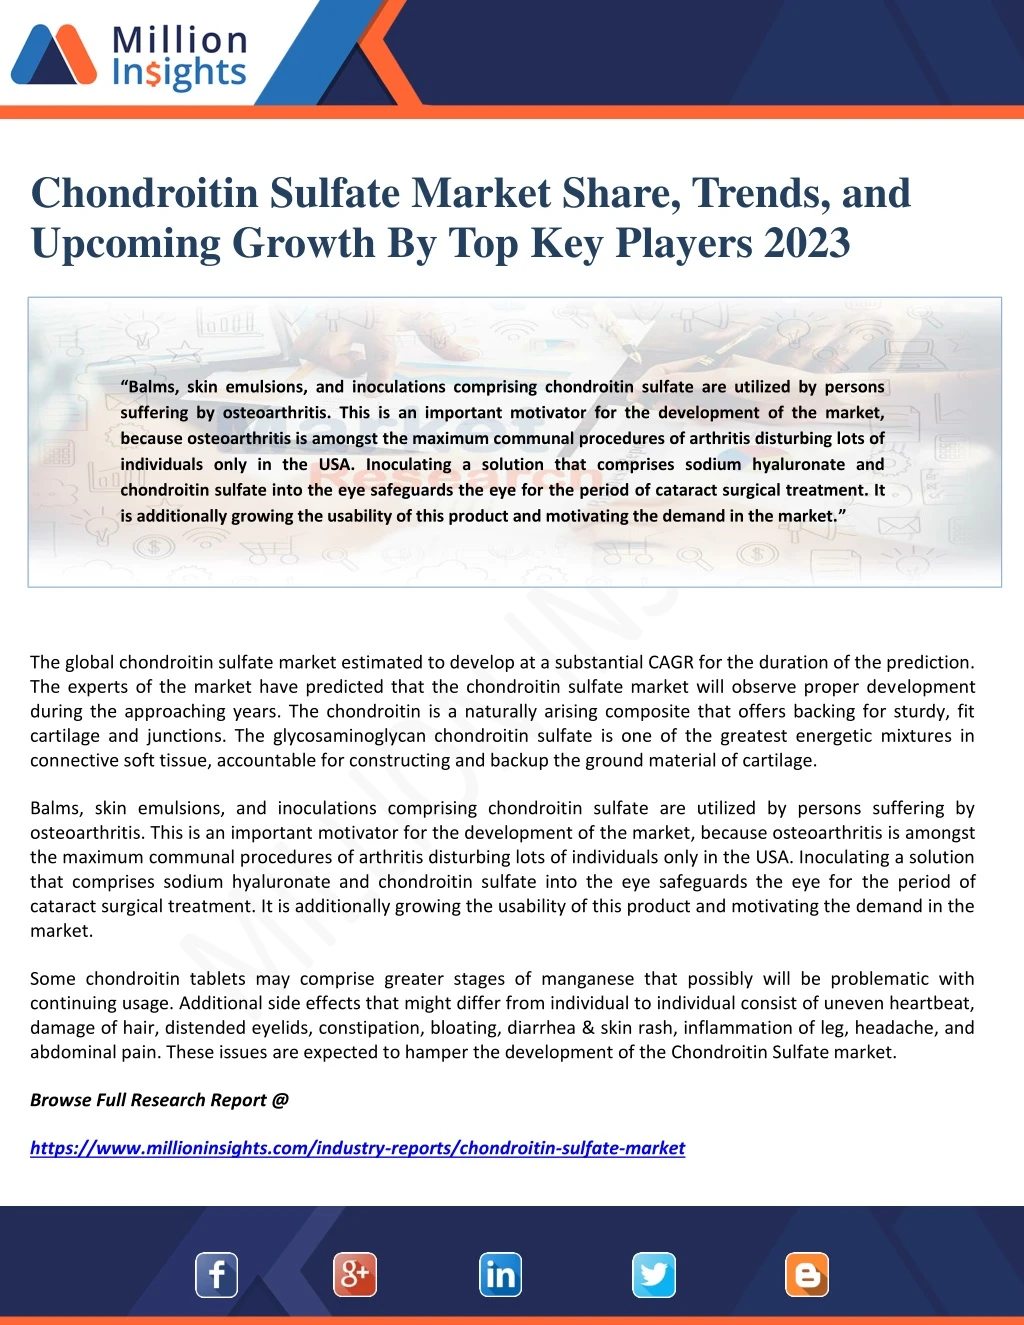 chondroitin sulfate market share trends